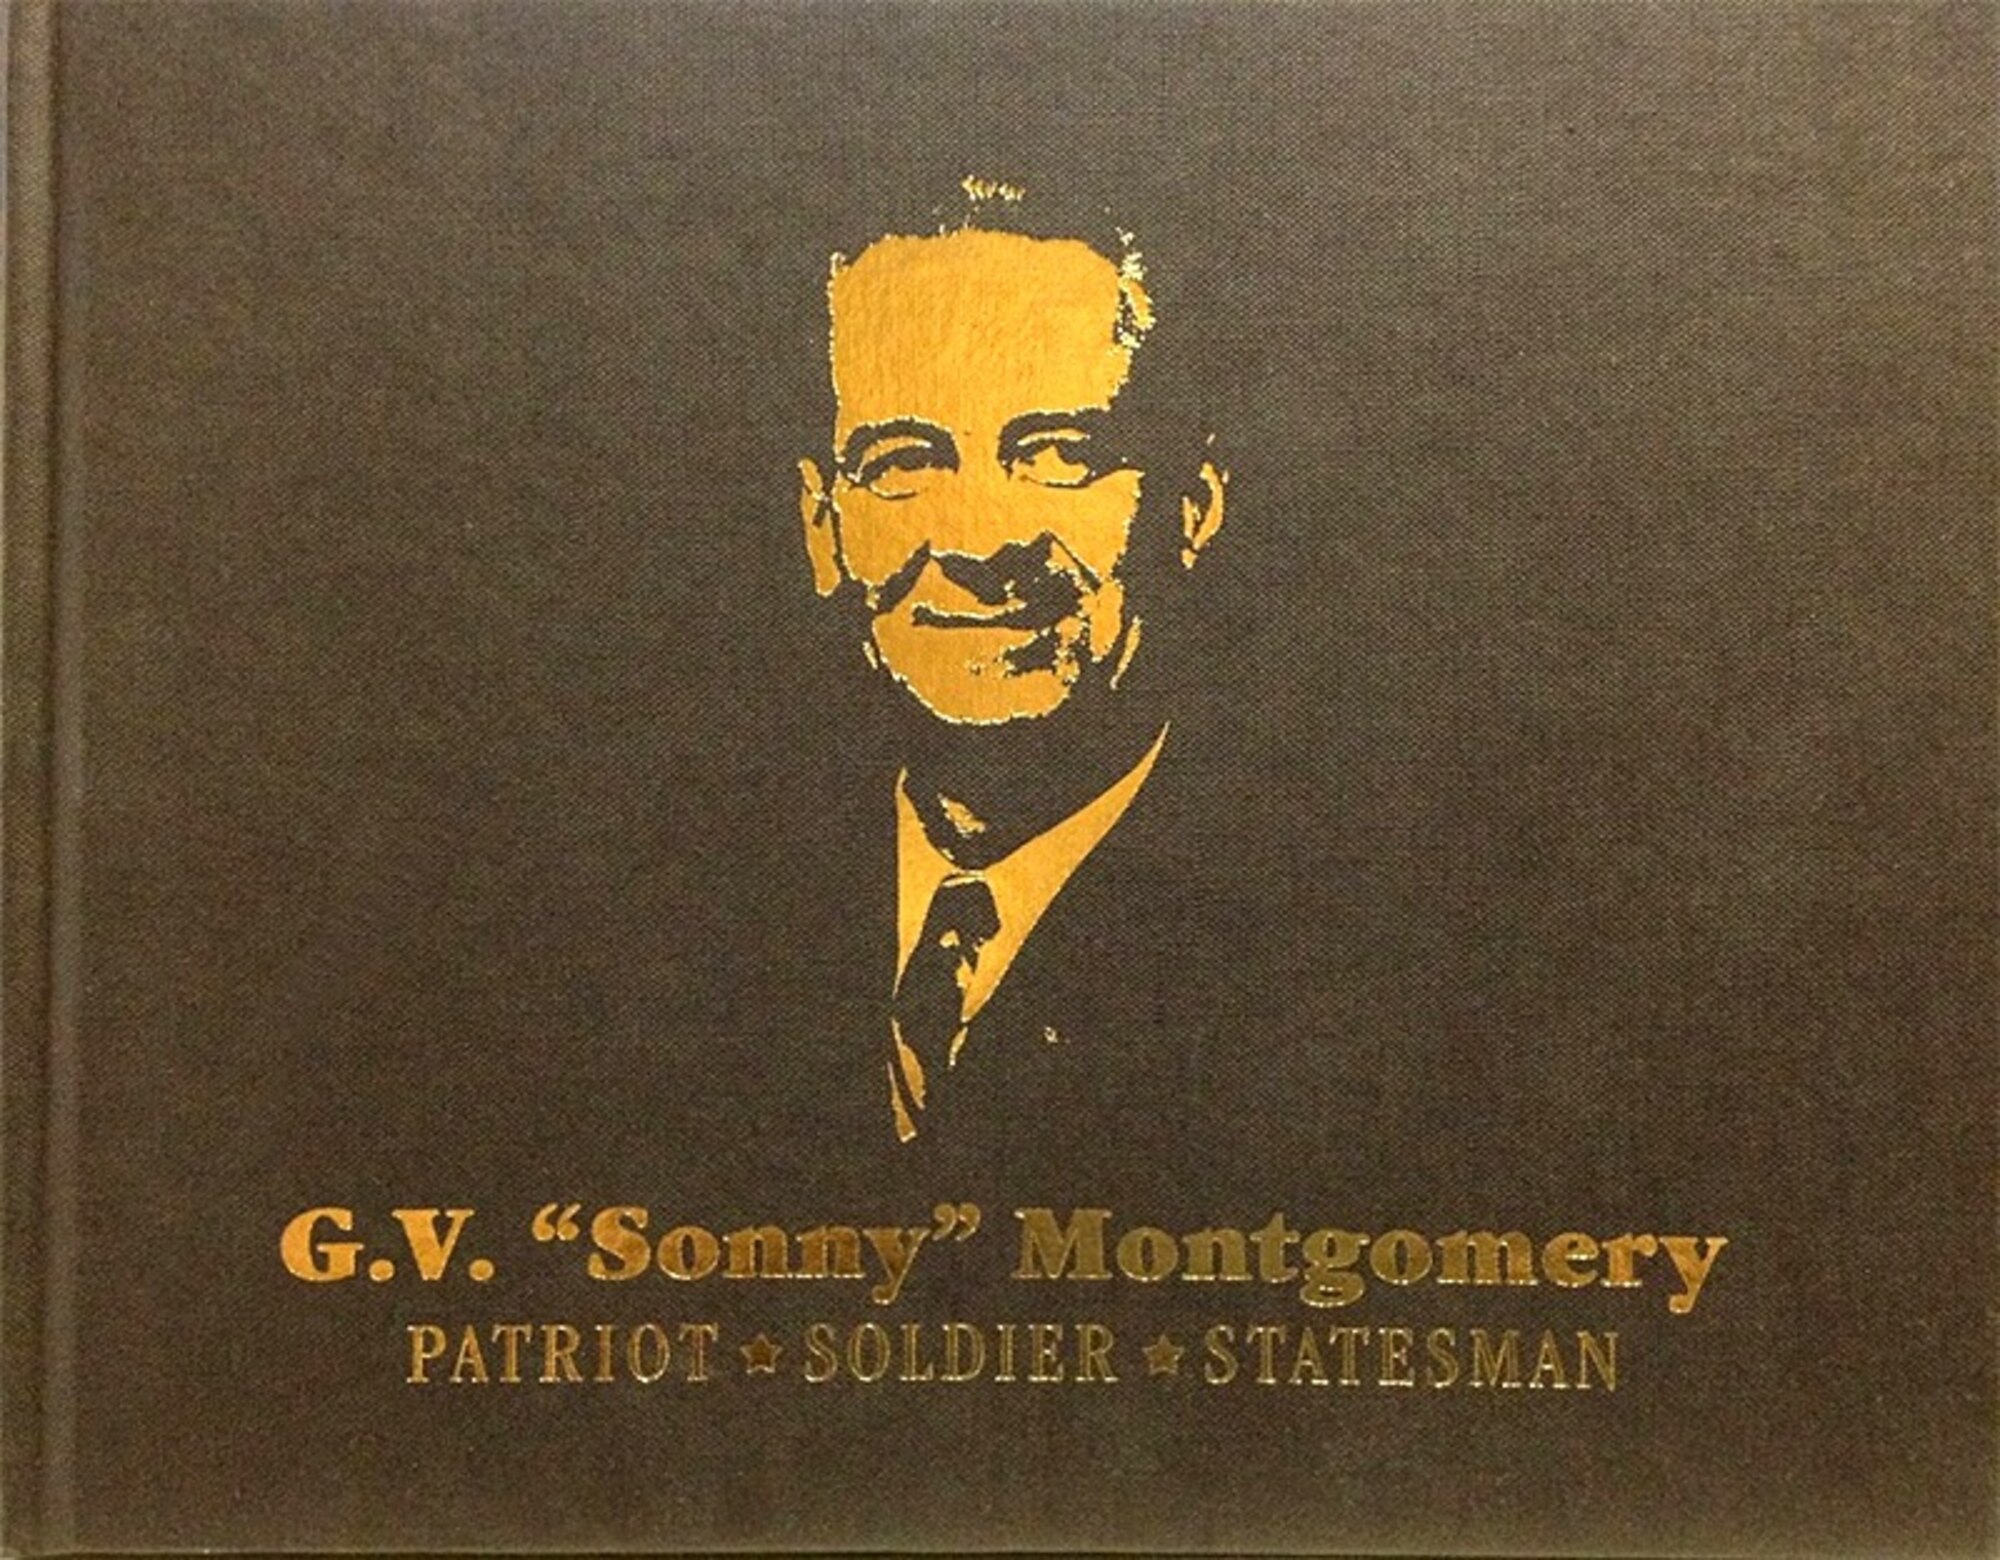 The enlisted dorms of Columbus Air Force Base are named after Gillespie “Sonny” Montgomery; a Columbus Wingman retired U.S. Army major general and retired congressman who was from Mississippi. The building was dedicated on Jan. 15, 1999 and was dedicated to Montgomery for his service in the National Guard and his great strides taken during his time in the Senate to improve the lives of military members and veterans. (Courtesy Photo)